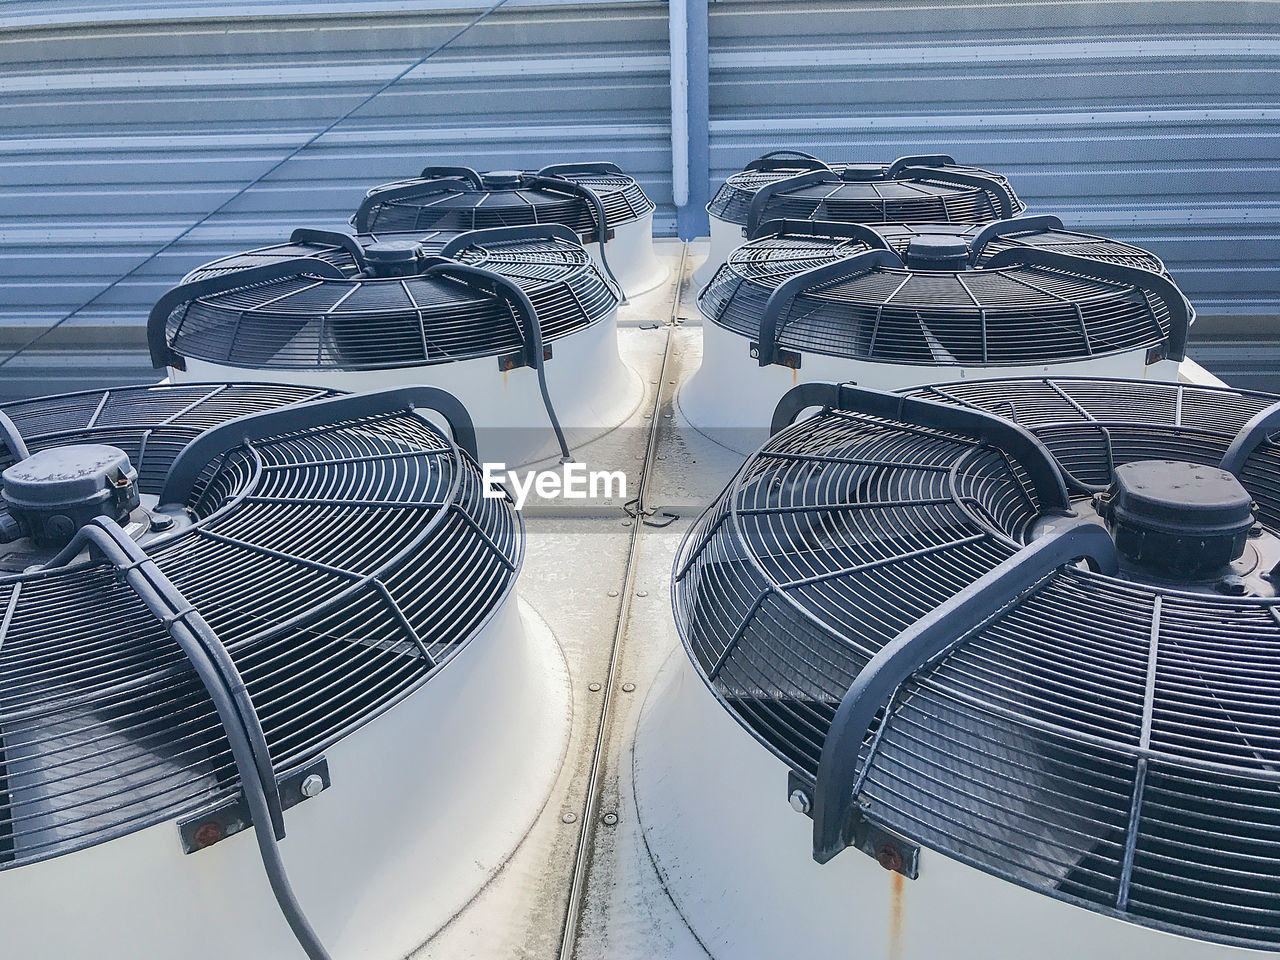 Low angle view of air conditioner fans